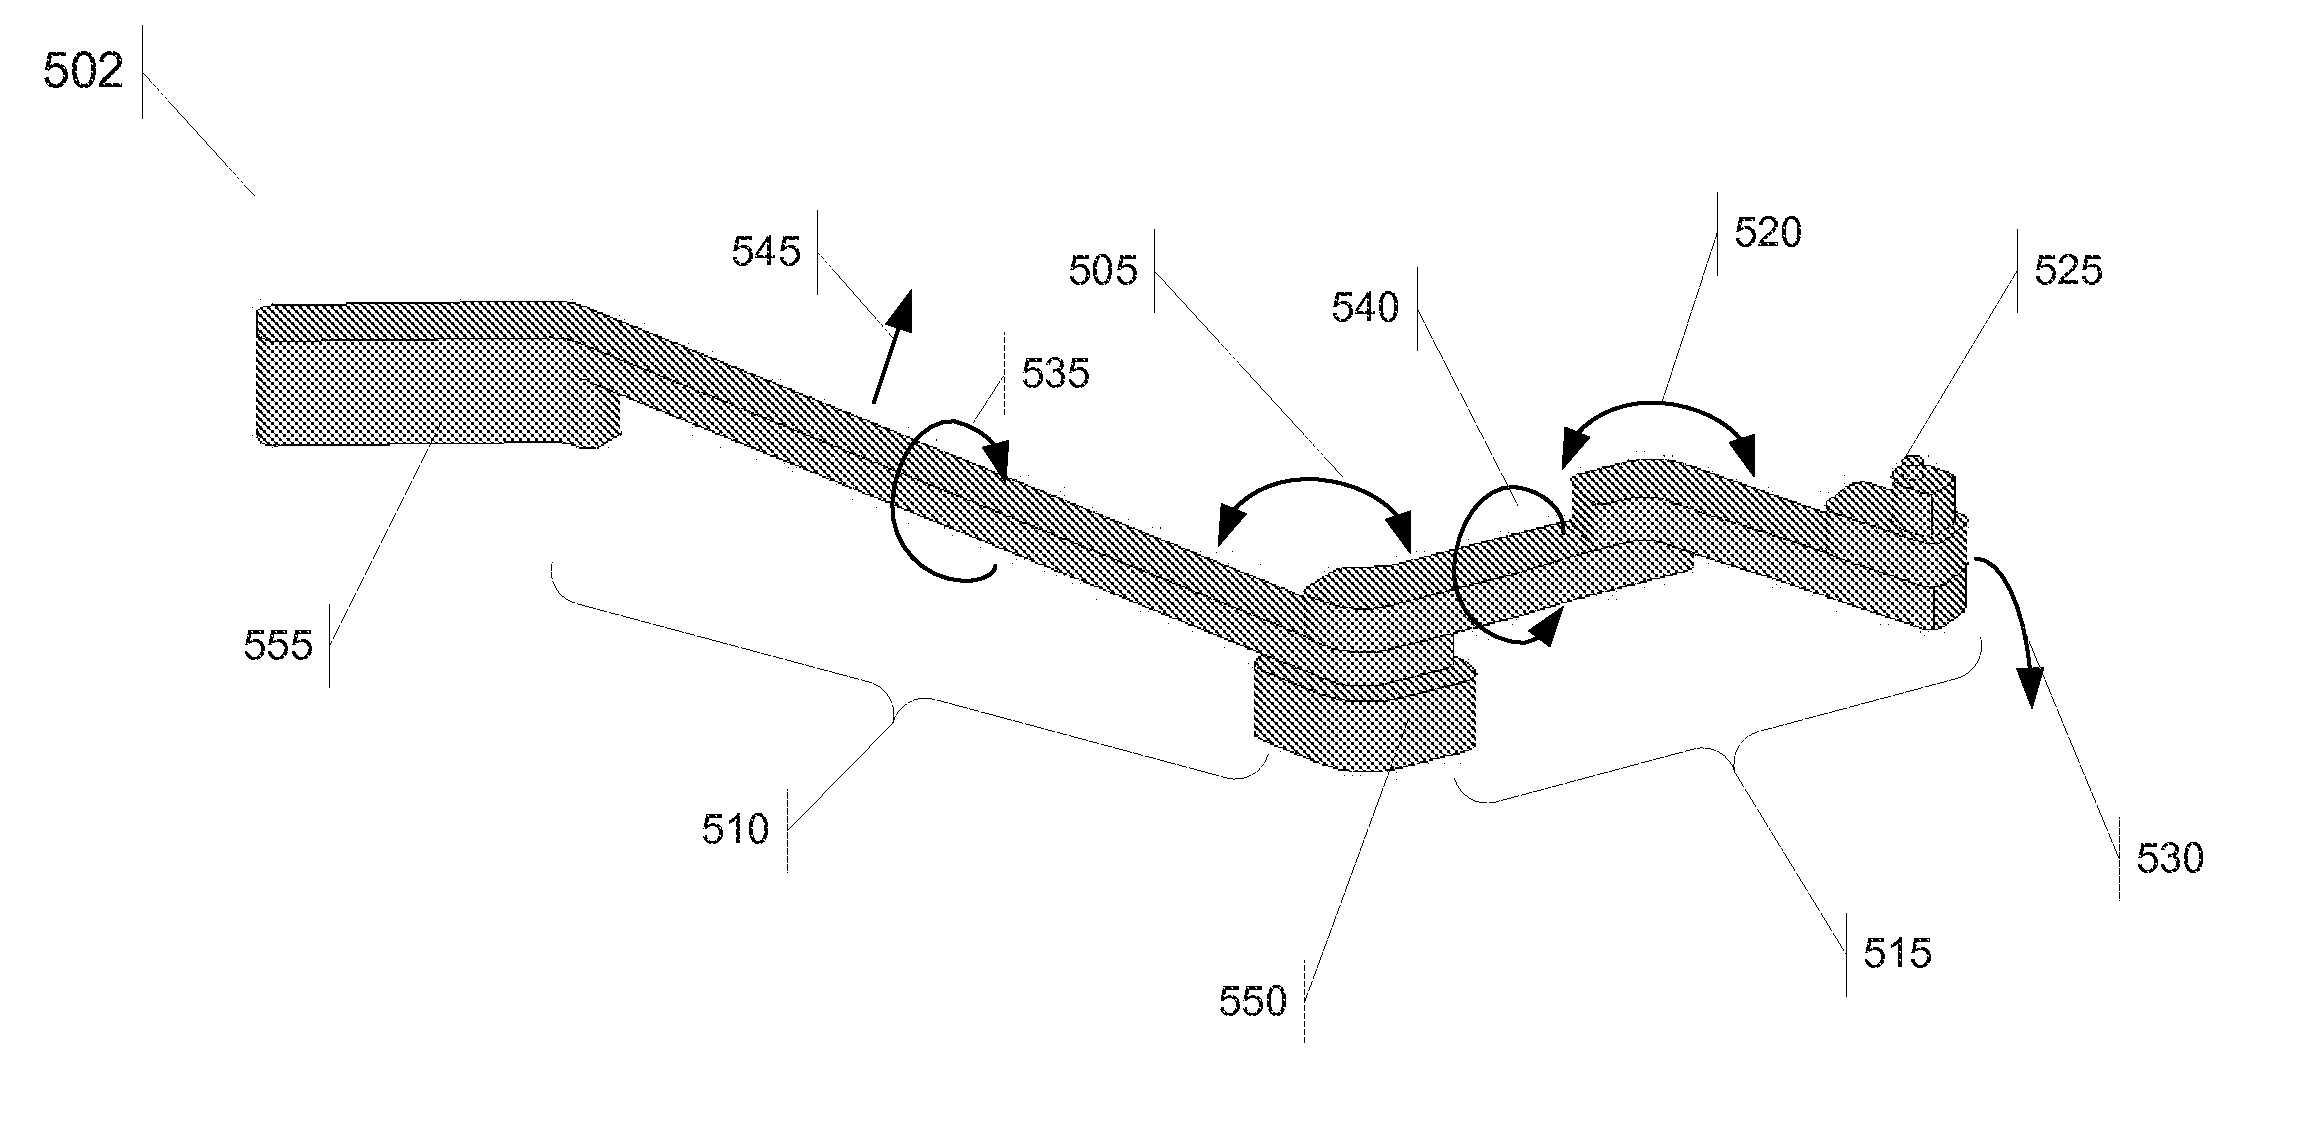 Hybrid probe for testing semiconductor devices